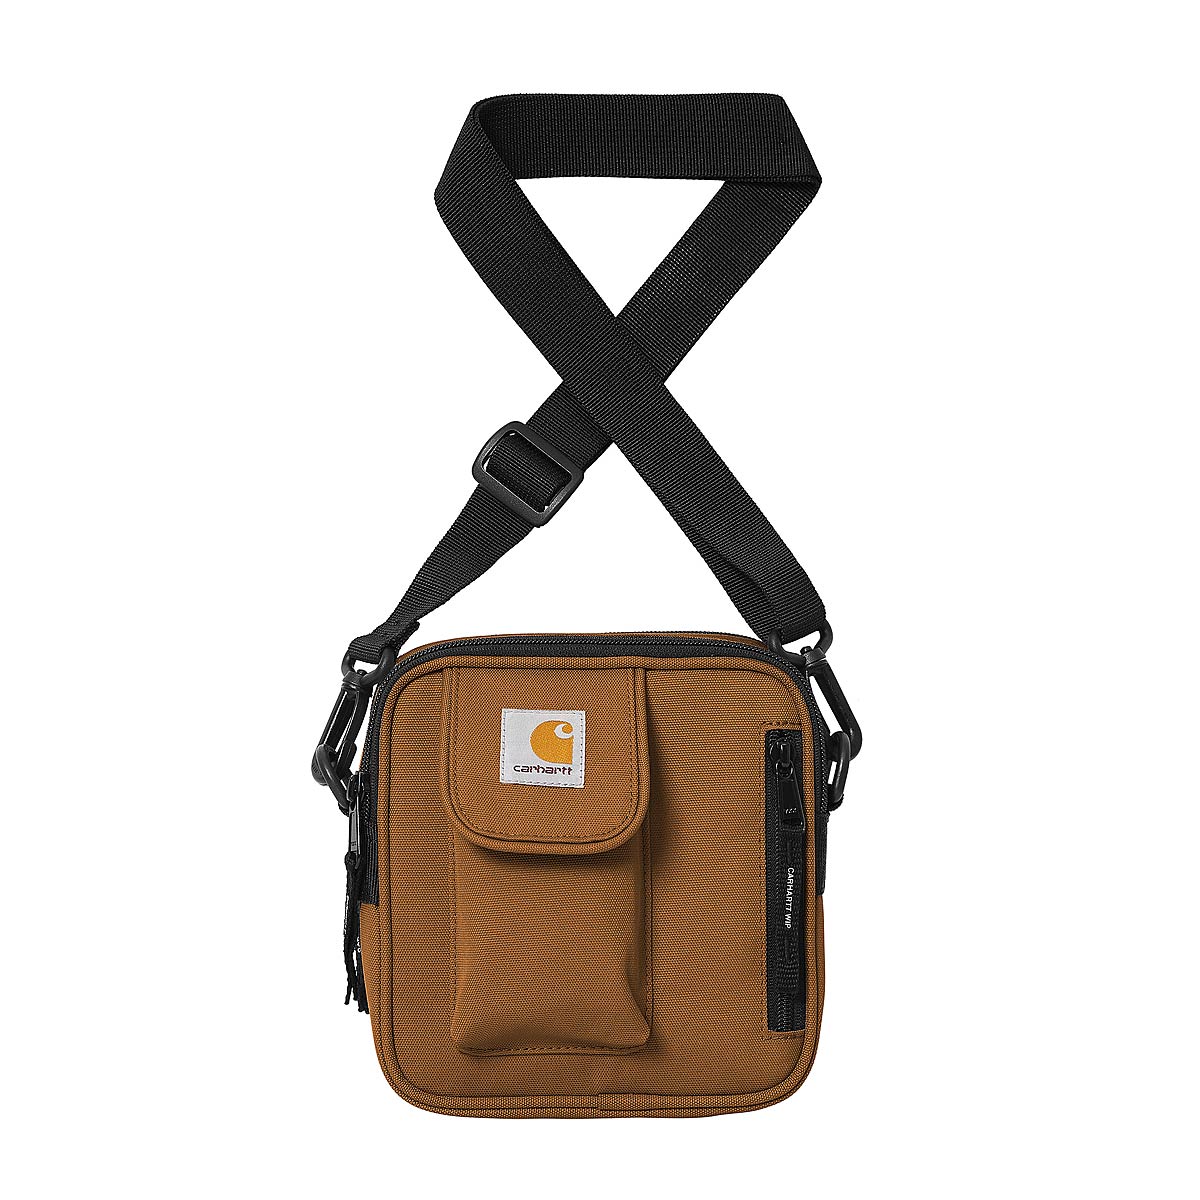 Carhartt Wip Essentials Bag, Small, Deep H Brown product